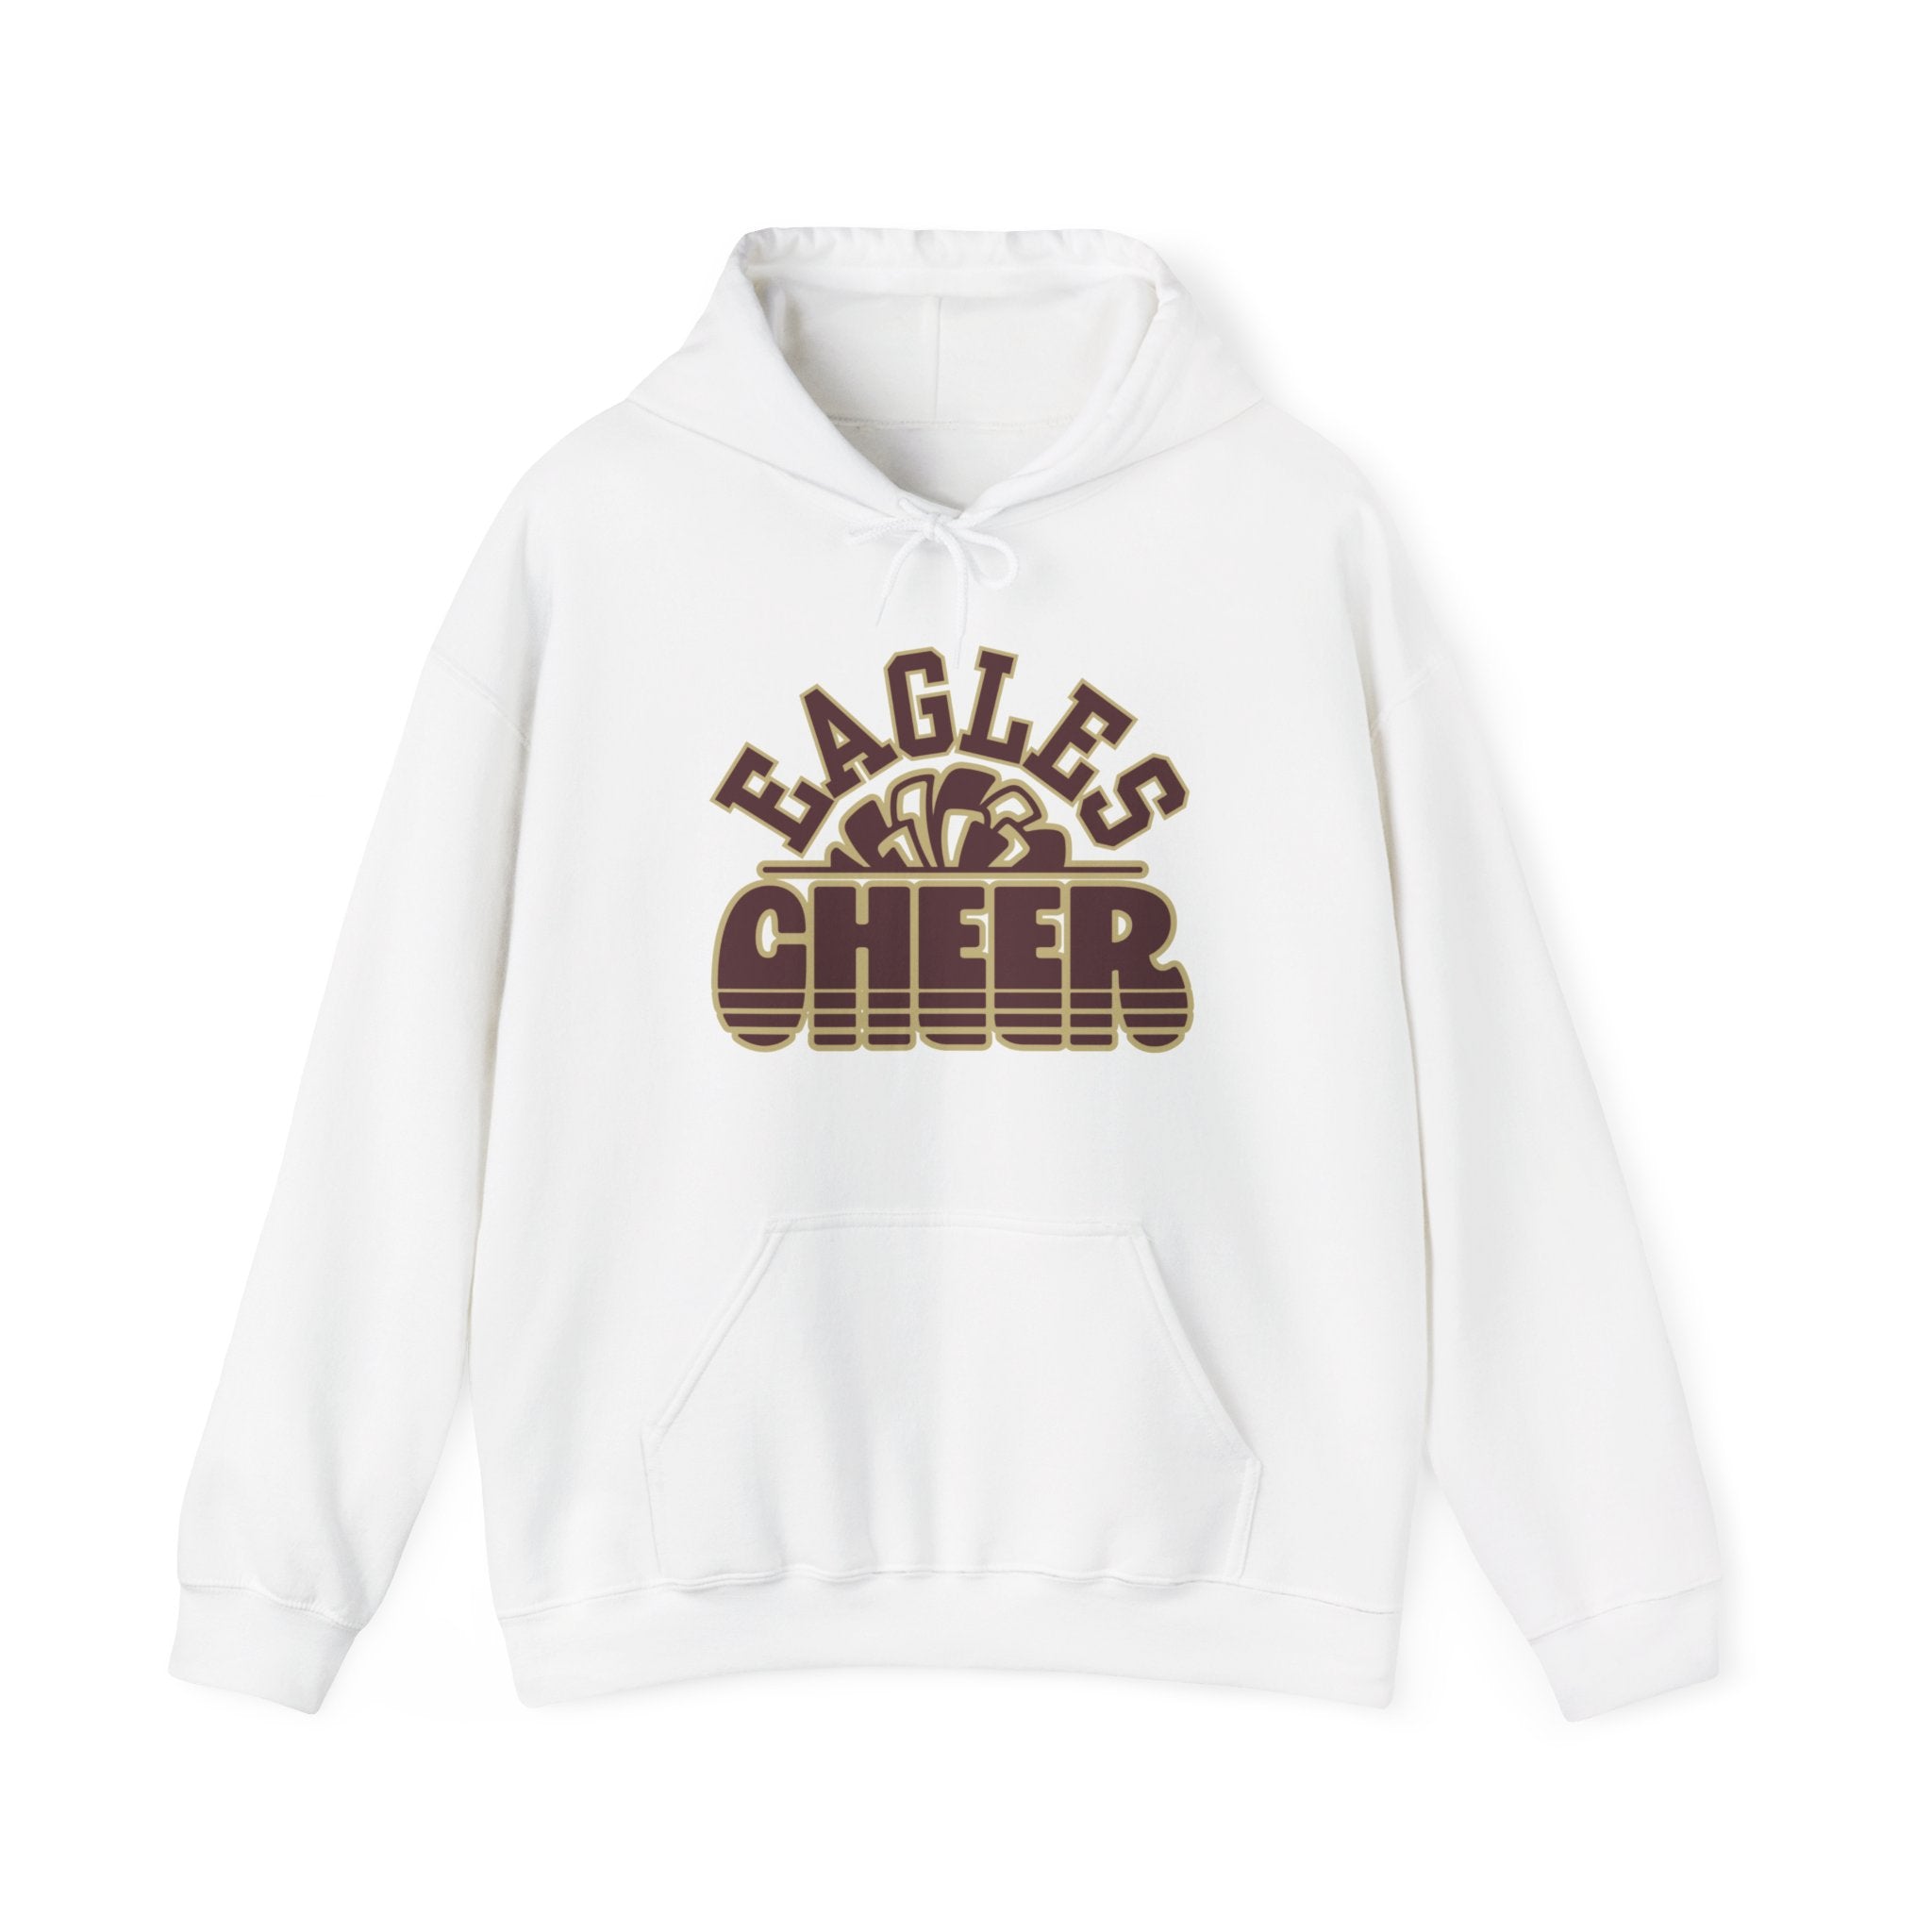 Adult Unisex Eagles Cheer Graphic Hoodie - New Albany Eagles